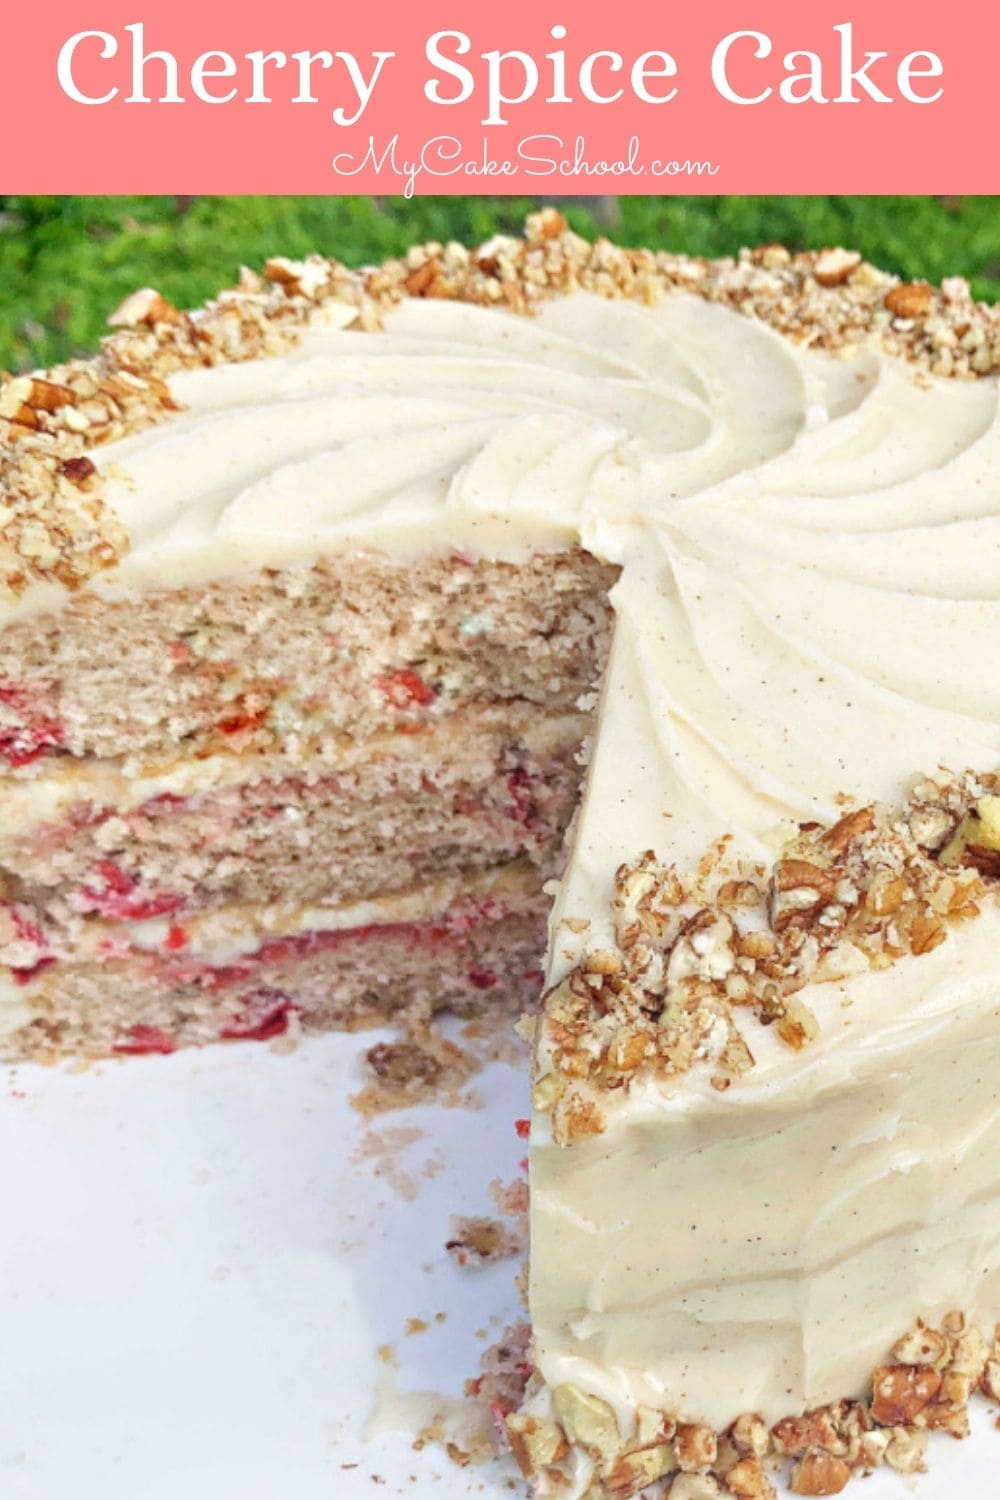 Cherry Spice Cake- So moist and delicious!